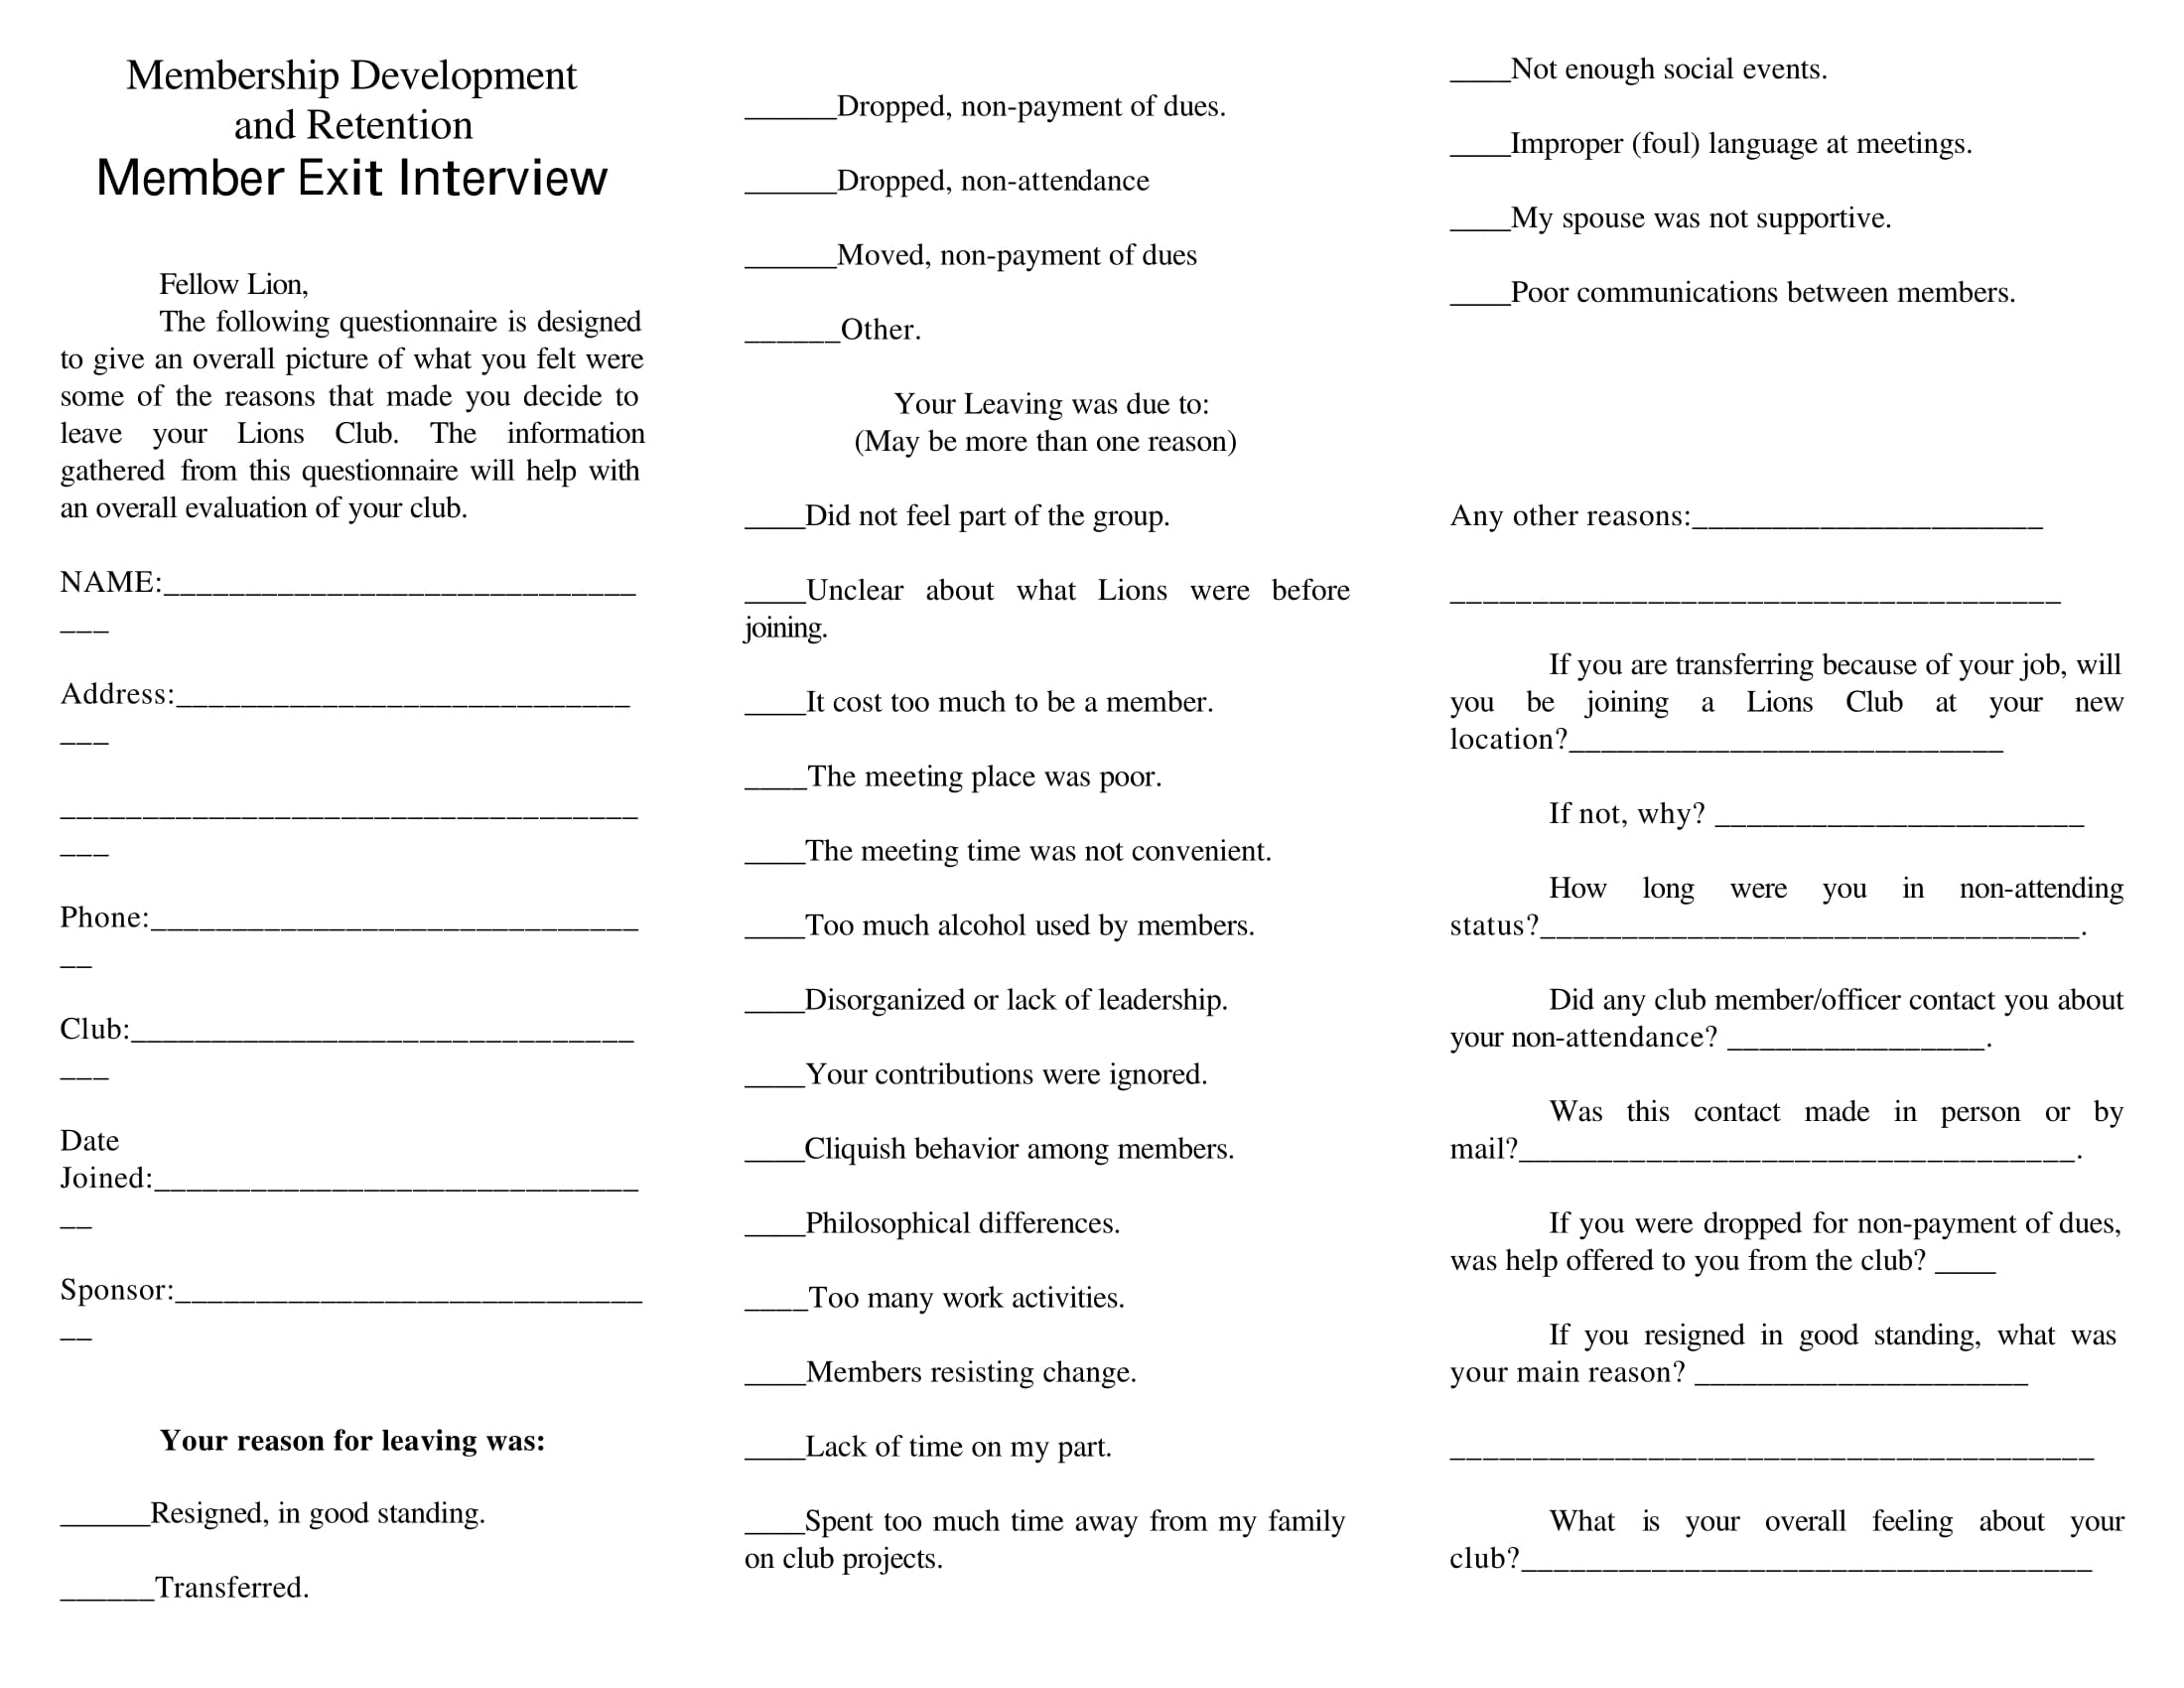 member exit interview form example